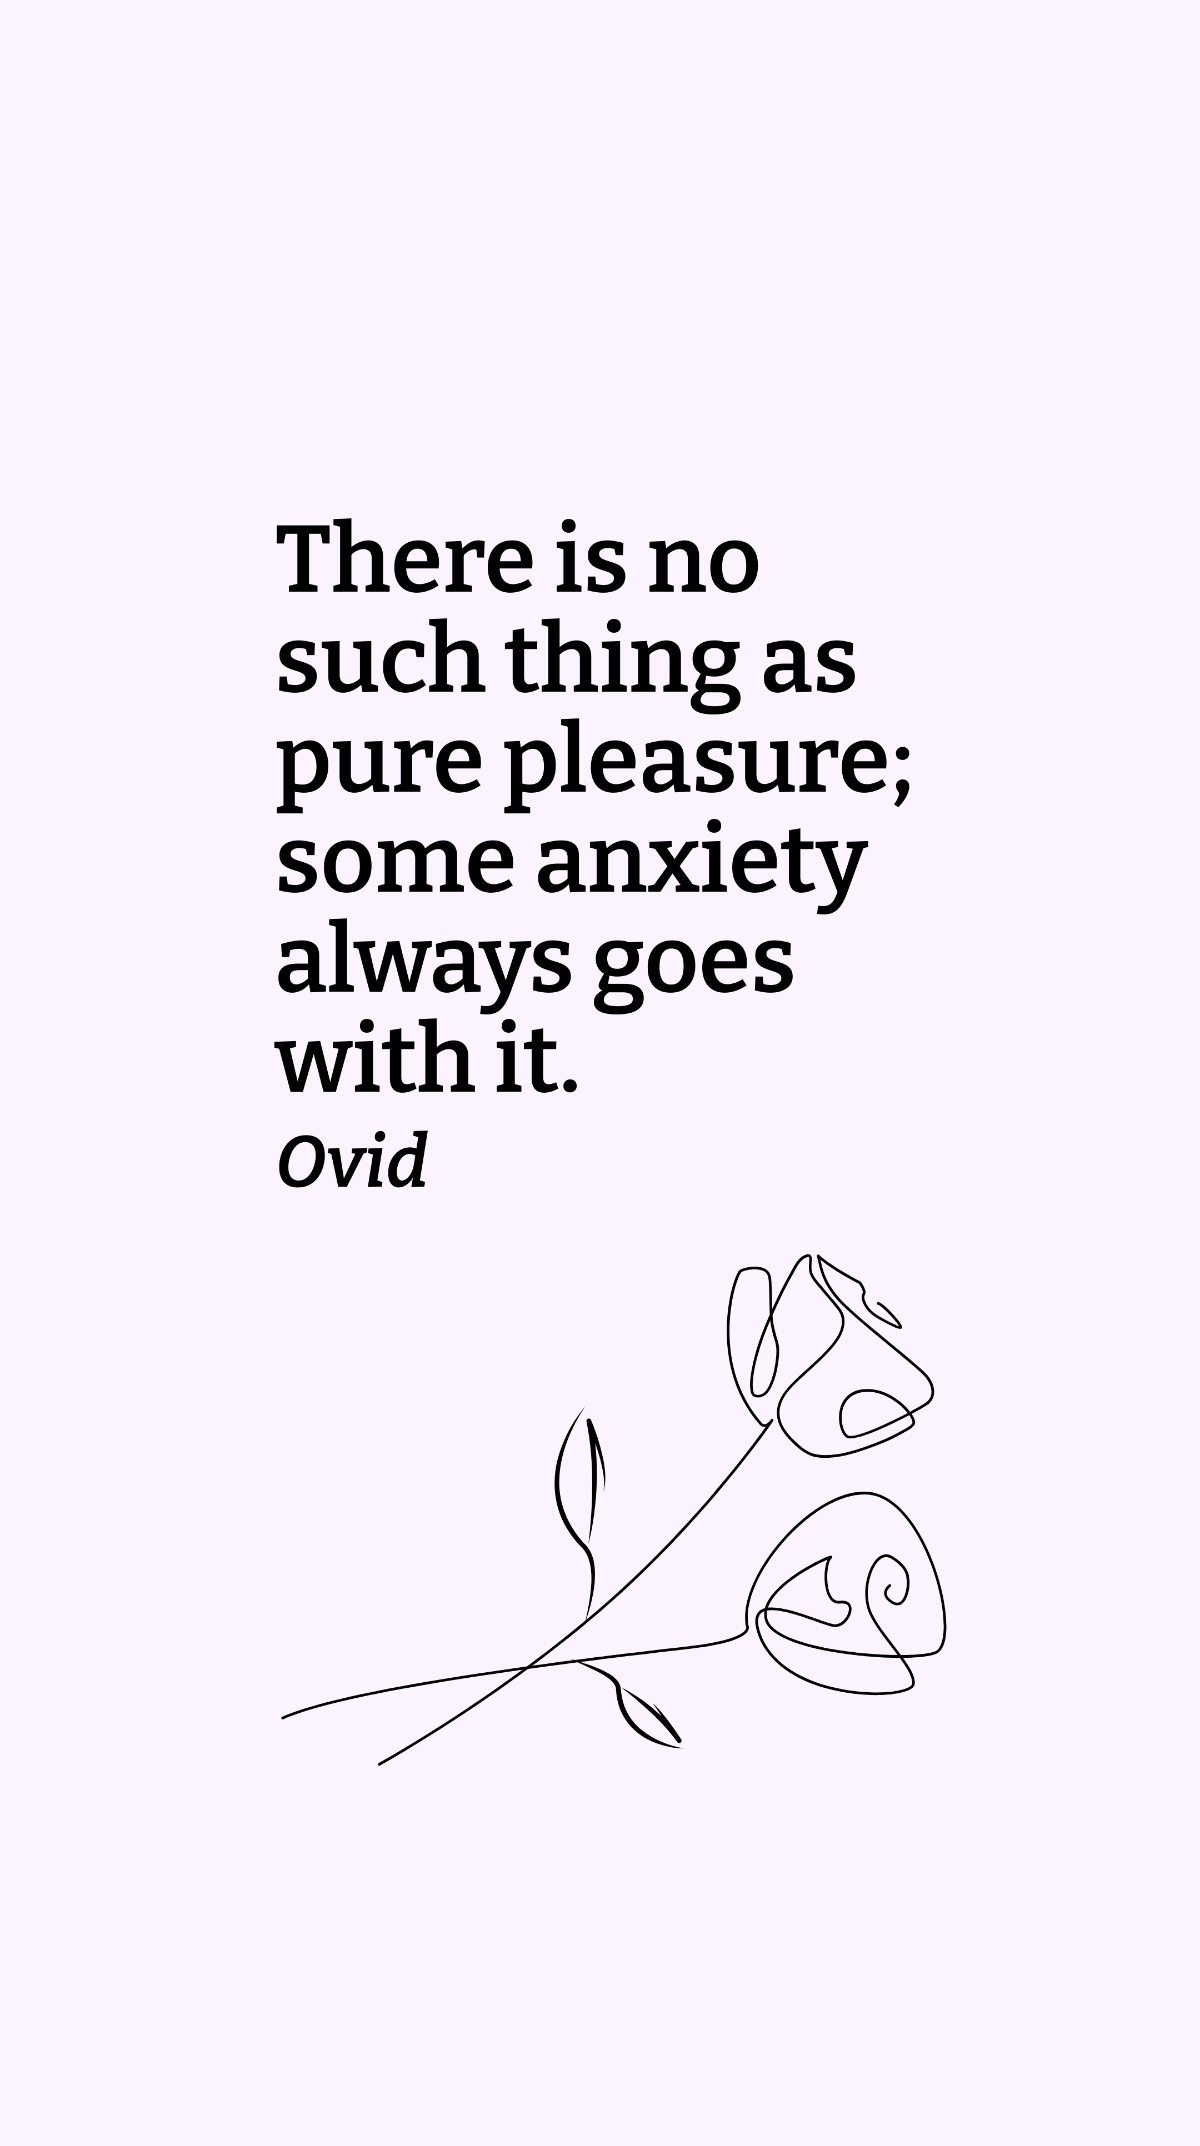 Ovid - There is no such thing as pure pleasure; some anxiety always goes with it. Template